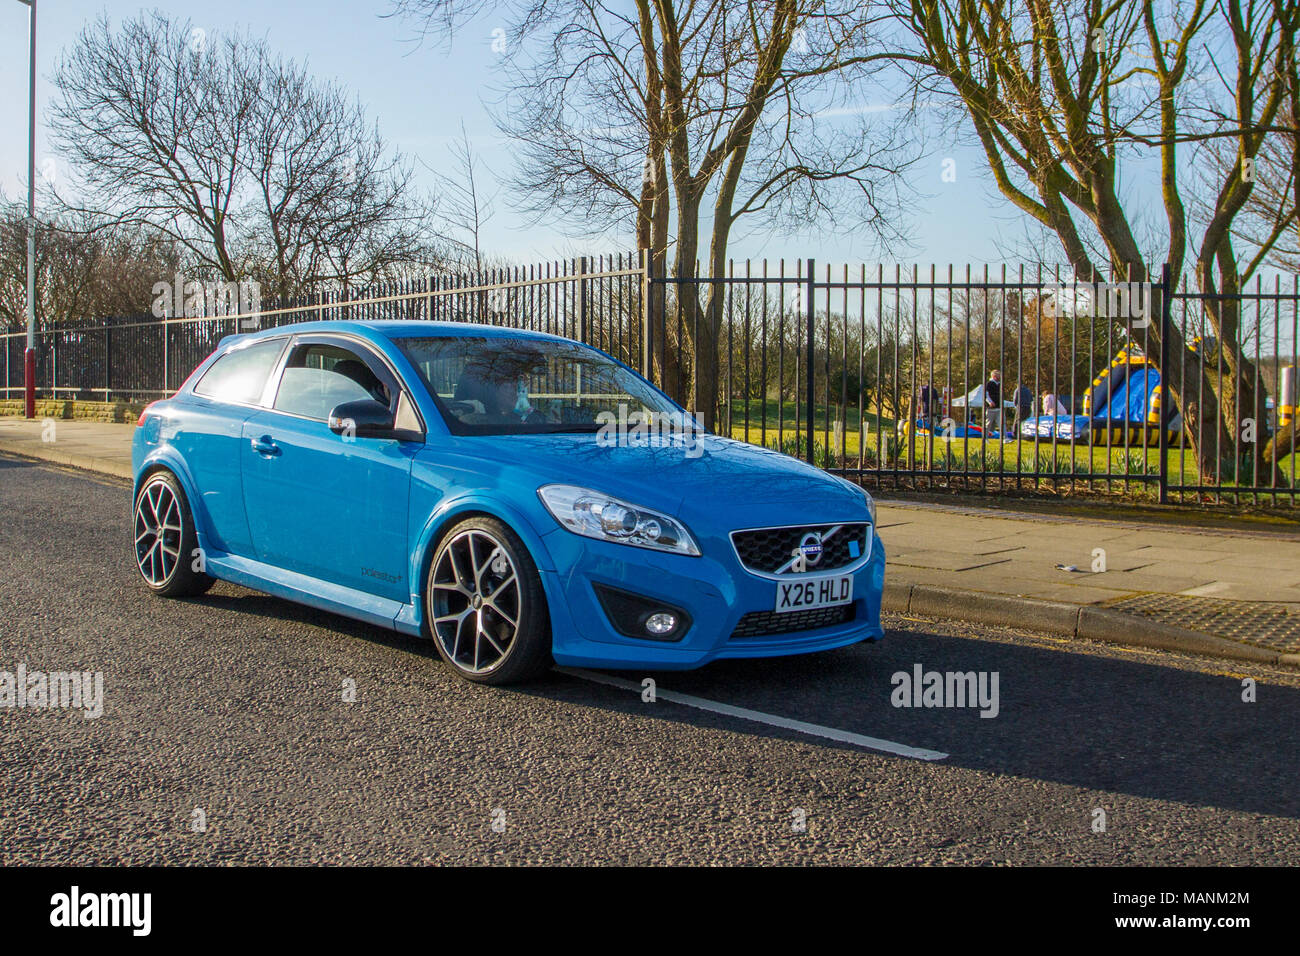 2012 blue Volvo C30 R-Design Lux T5 2521cc 2dr saloon at the North-West Supercar event as cars and tourists arrive in the coastal resort. Cars are bumper to bumper on the seafront esplanade as classic & vintage car enthusiasts take advantage of warm weather for a motoring day out. Stock Photo